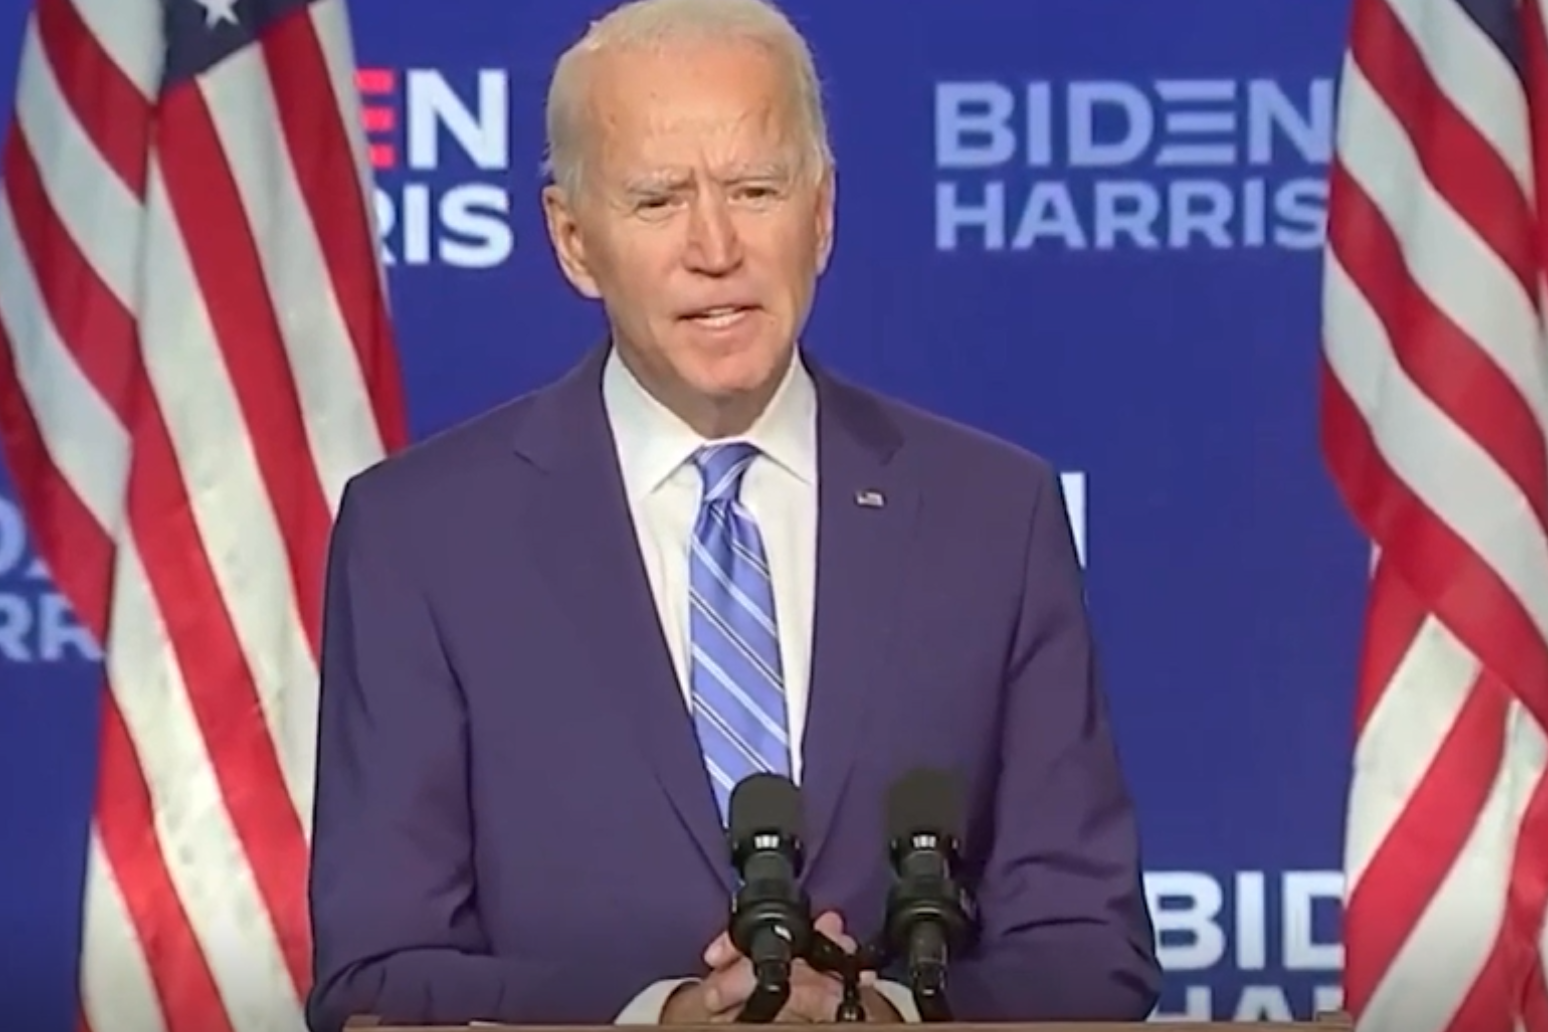 US agency declares Biden ‘apparent winner’ – clearing way for transition 